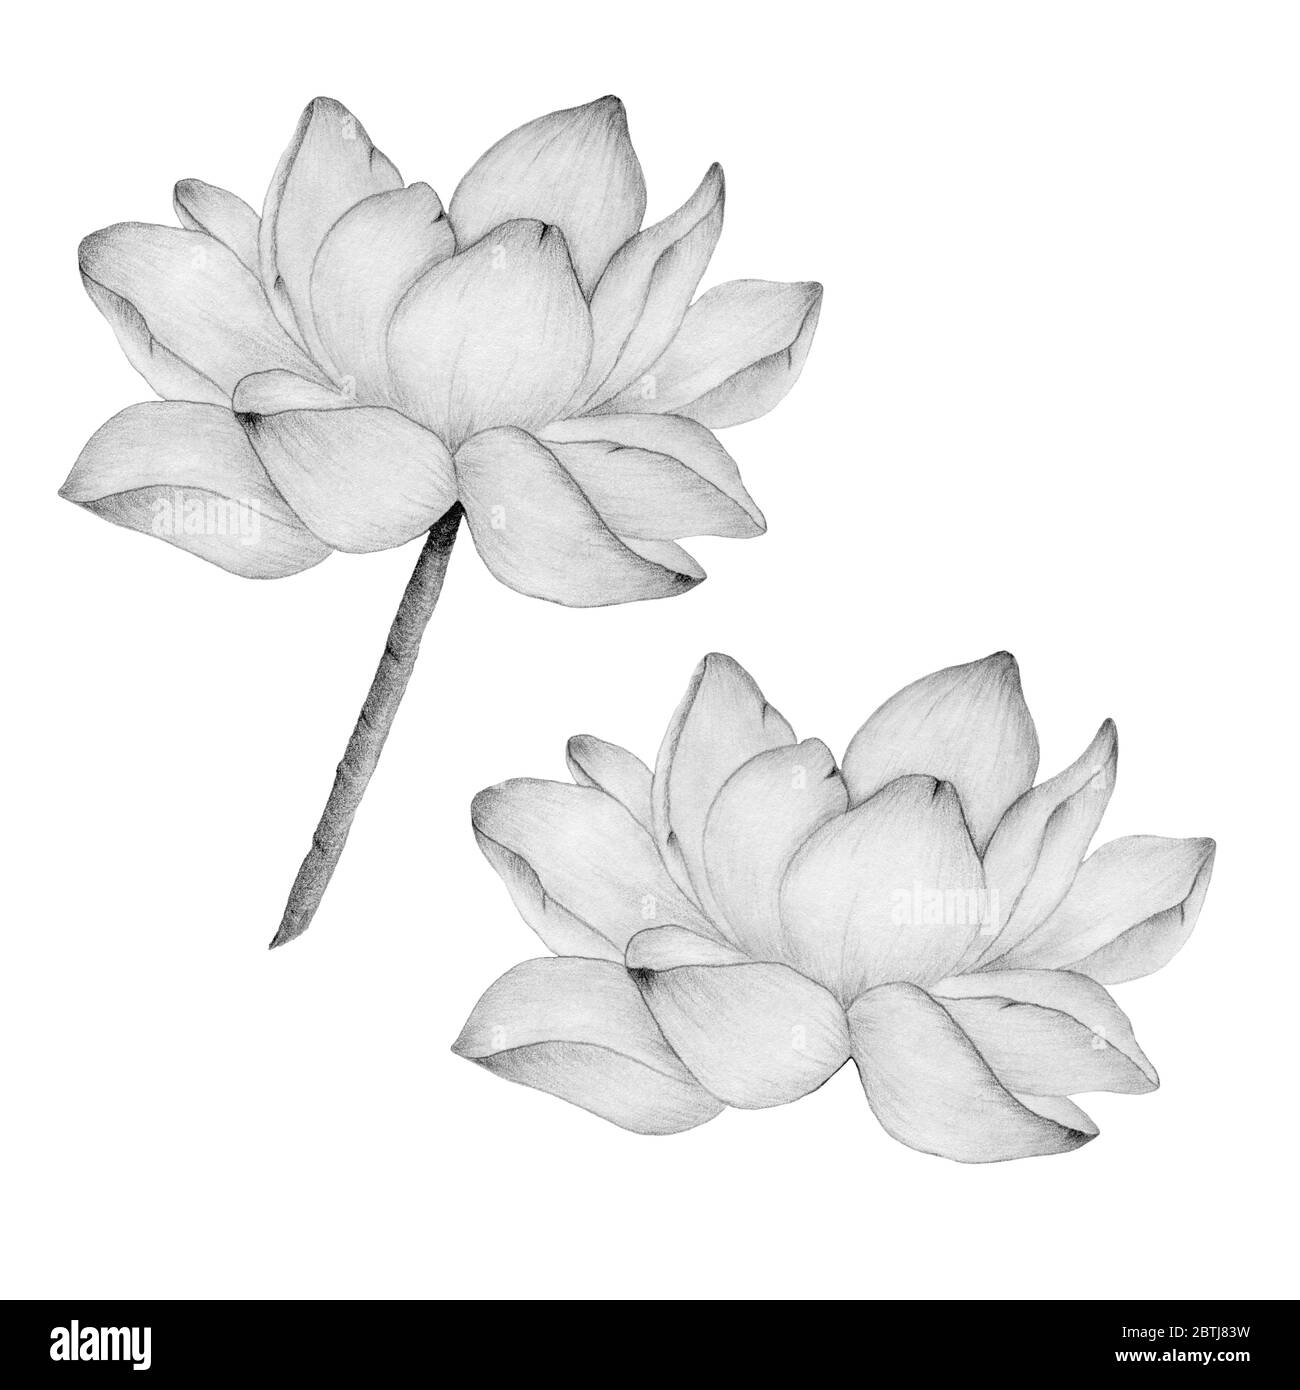 How To Draw A Lotus Flower | Easy Step By Step | Storiespub